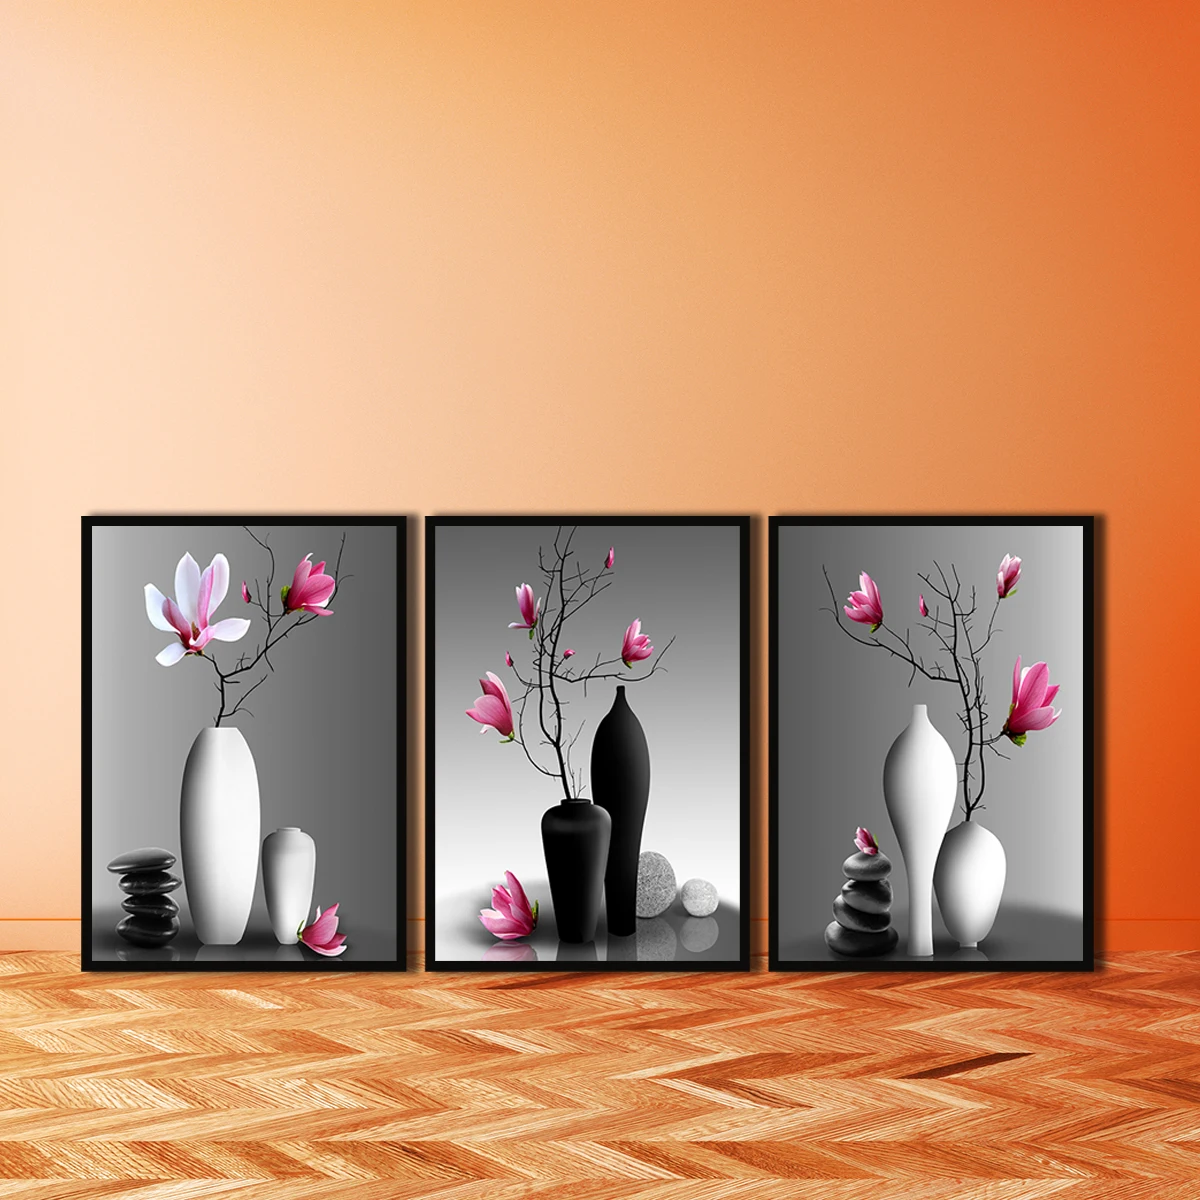 

No Frame Branch Magnolia Flower In Vase Wall Art Print Canvas Painting Nordic Posters and Prints Wall Pictures for Living Room